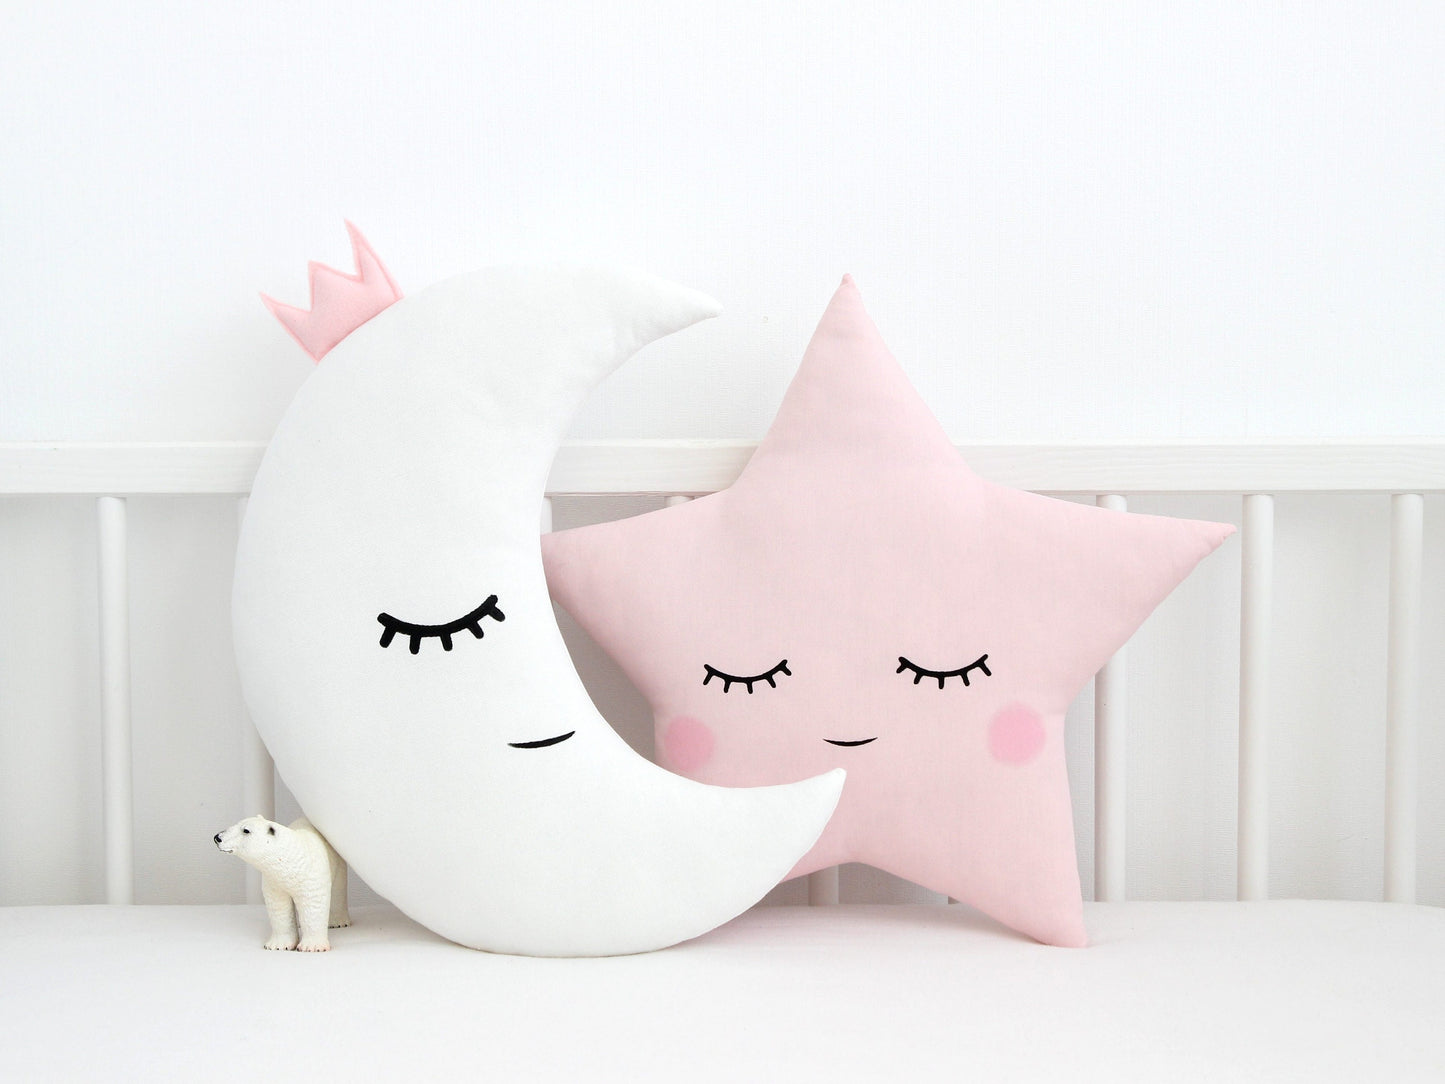 Set of 2 Pillows - White Crescent Moon Pillow and Pale Pink Star Pillow